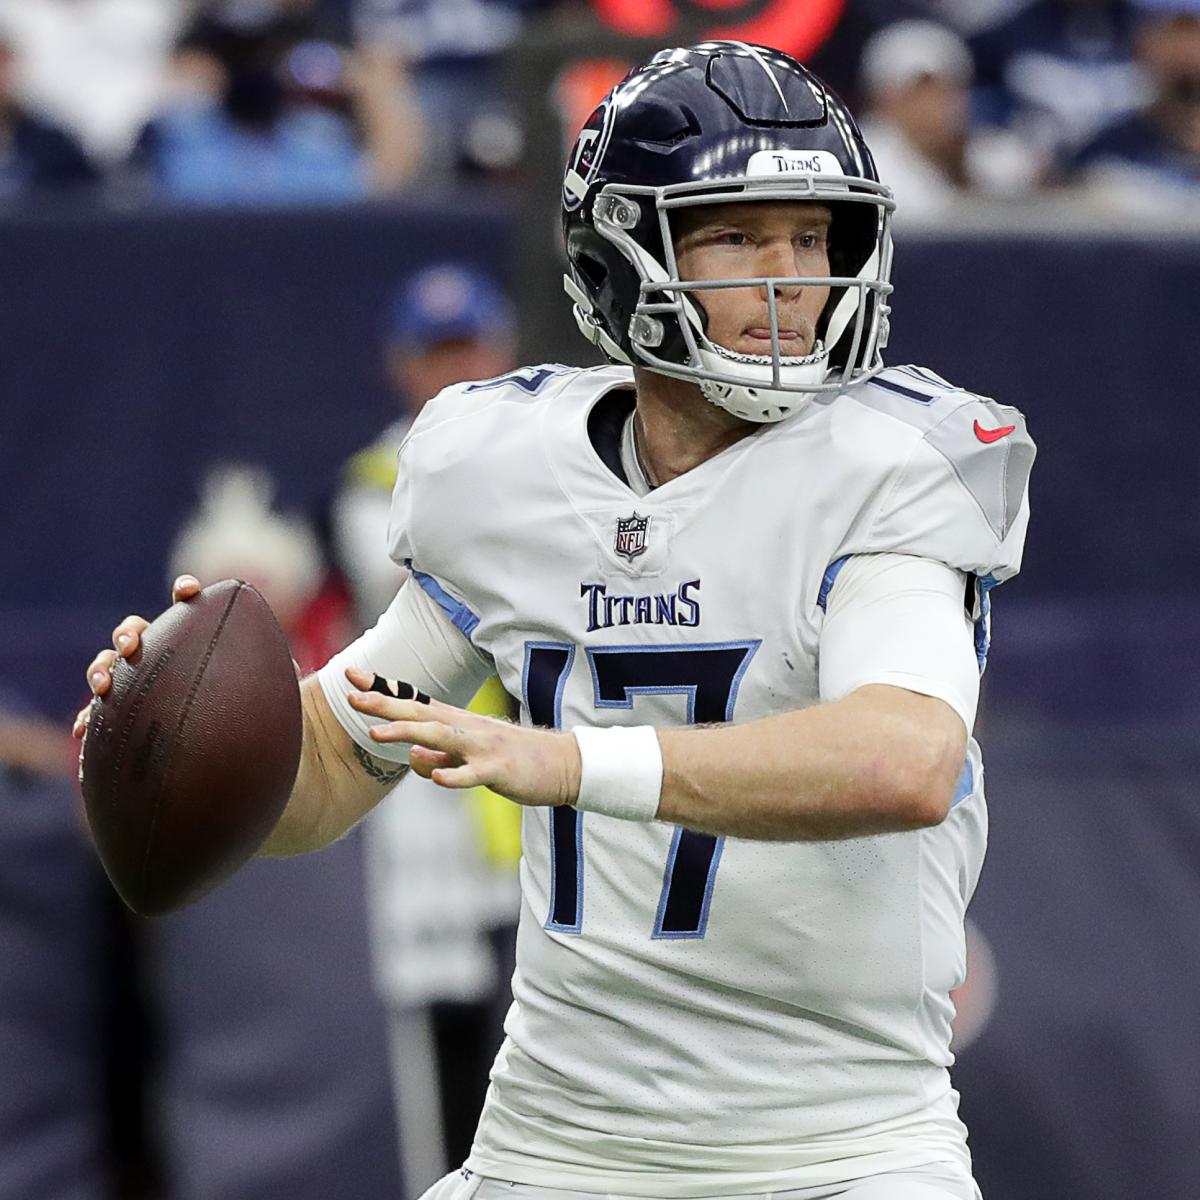 Bengals vs. Titans Updated Odds, Predictions for 2022 AFC Divisional Game thumbnail